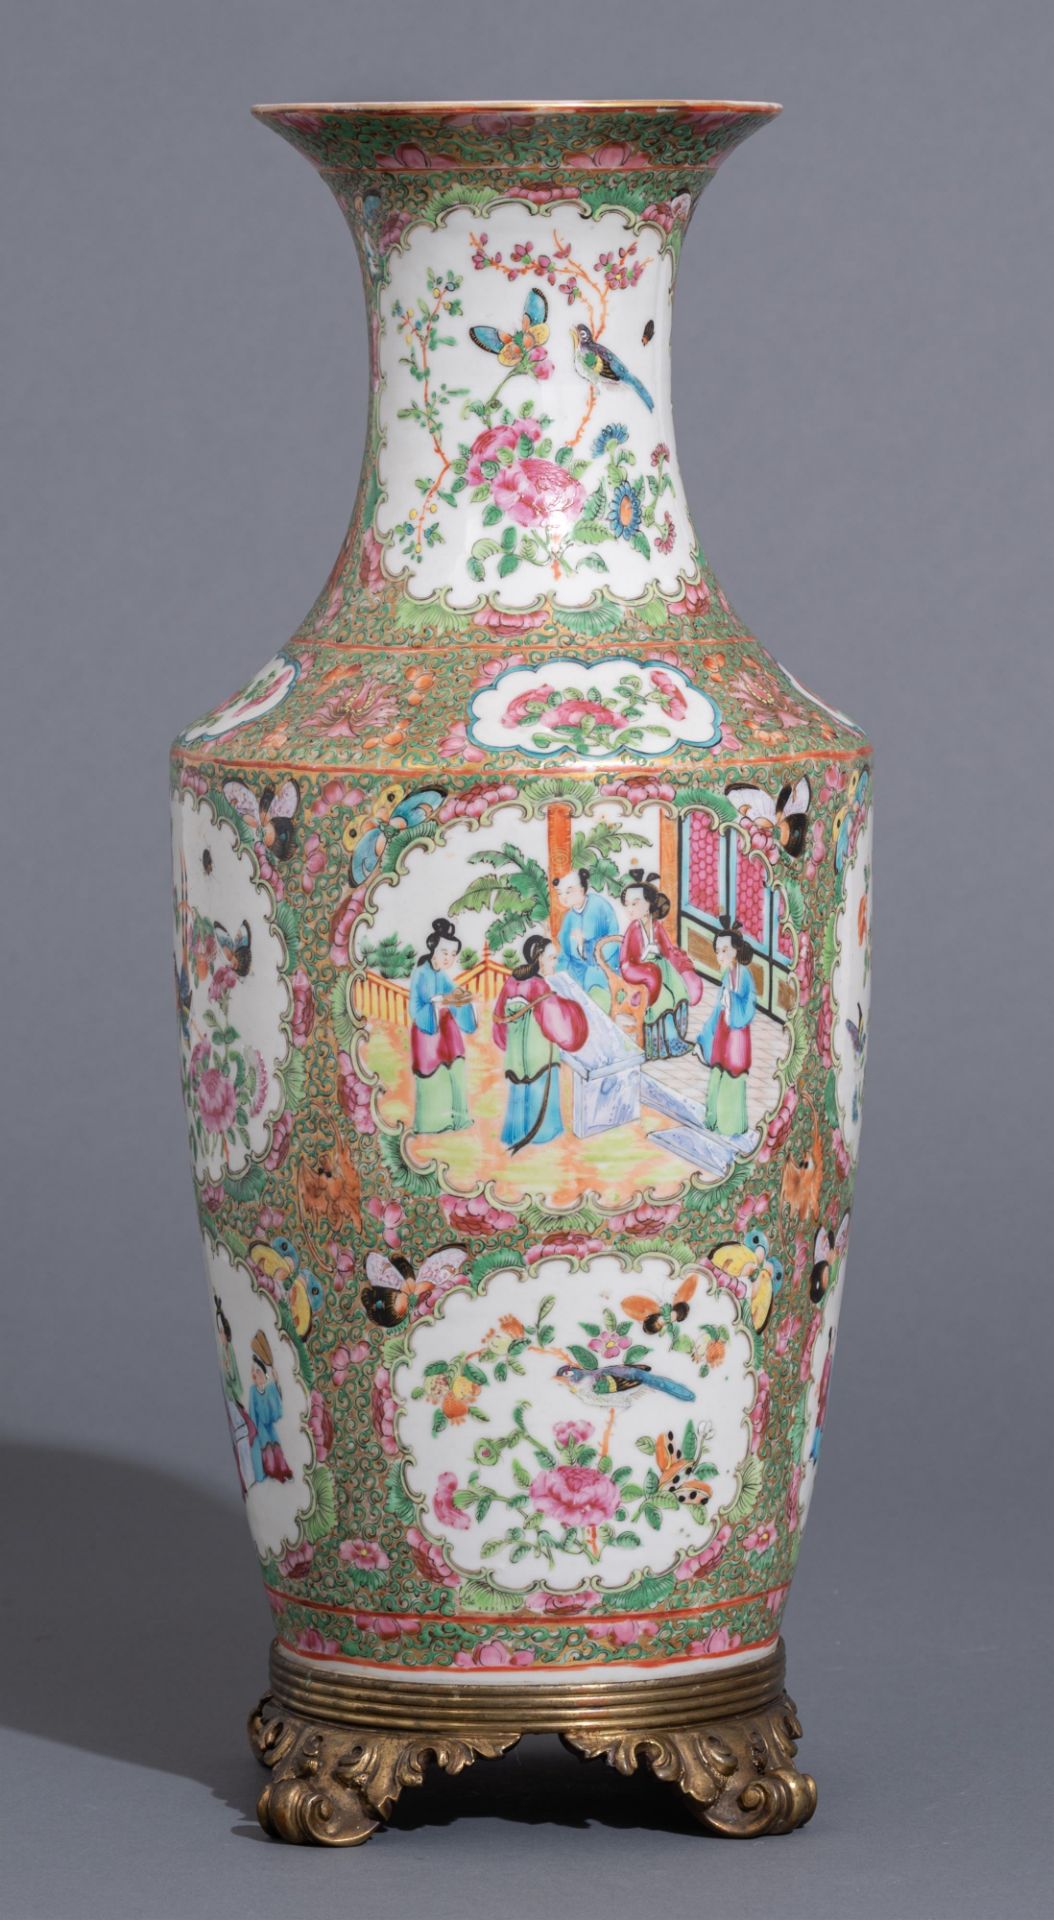 A collection of Chinese and Japanese porcelain items, 18th / 19th / 20thC, H 4 - 47 - ø 10,5 - 23 cm - Image 3 of 19